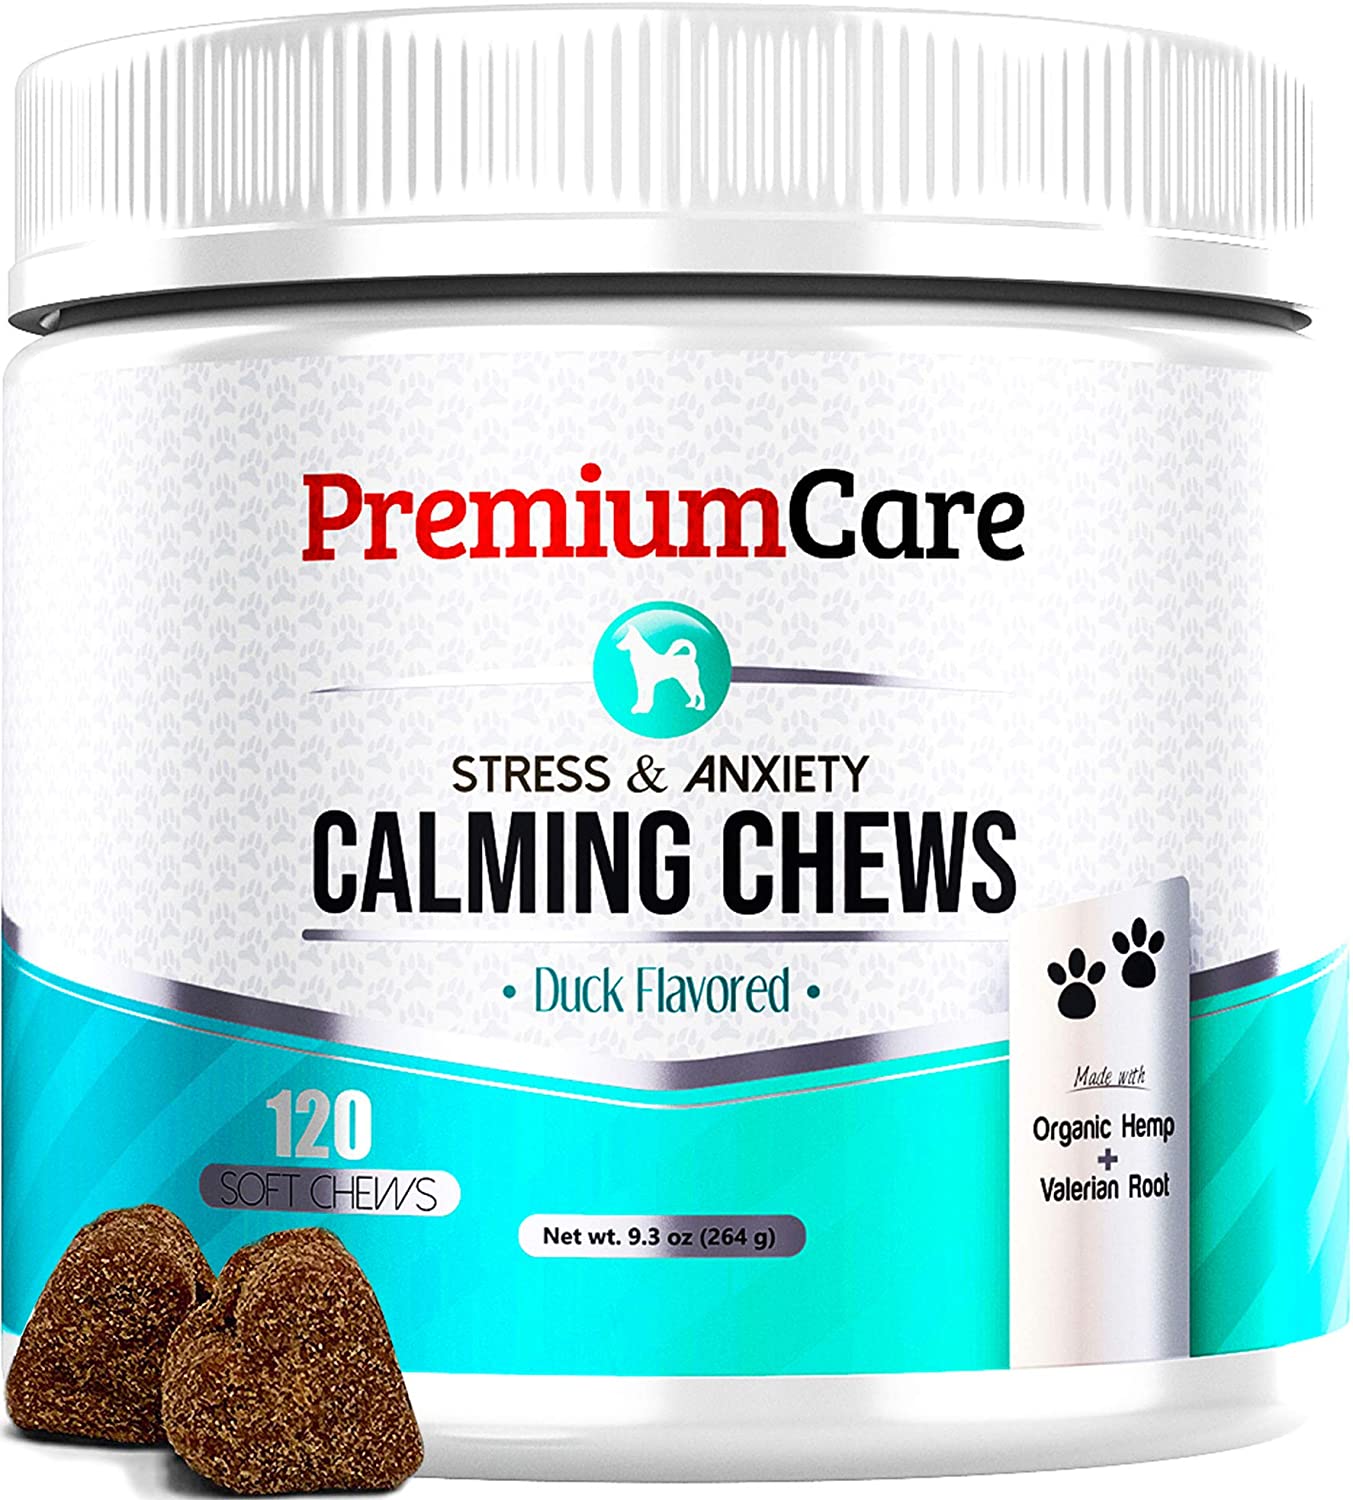 Premium Care Stress And Anxiety Calming Chews